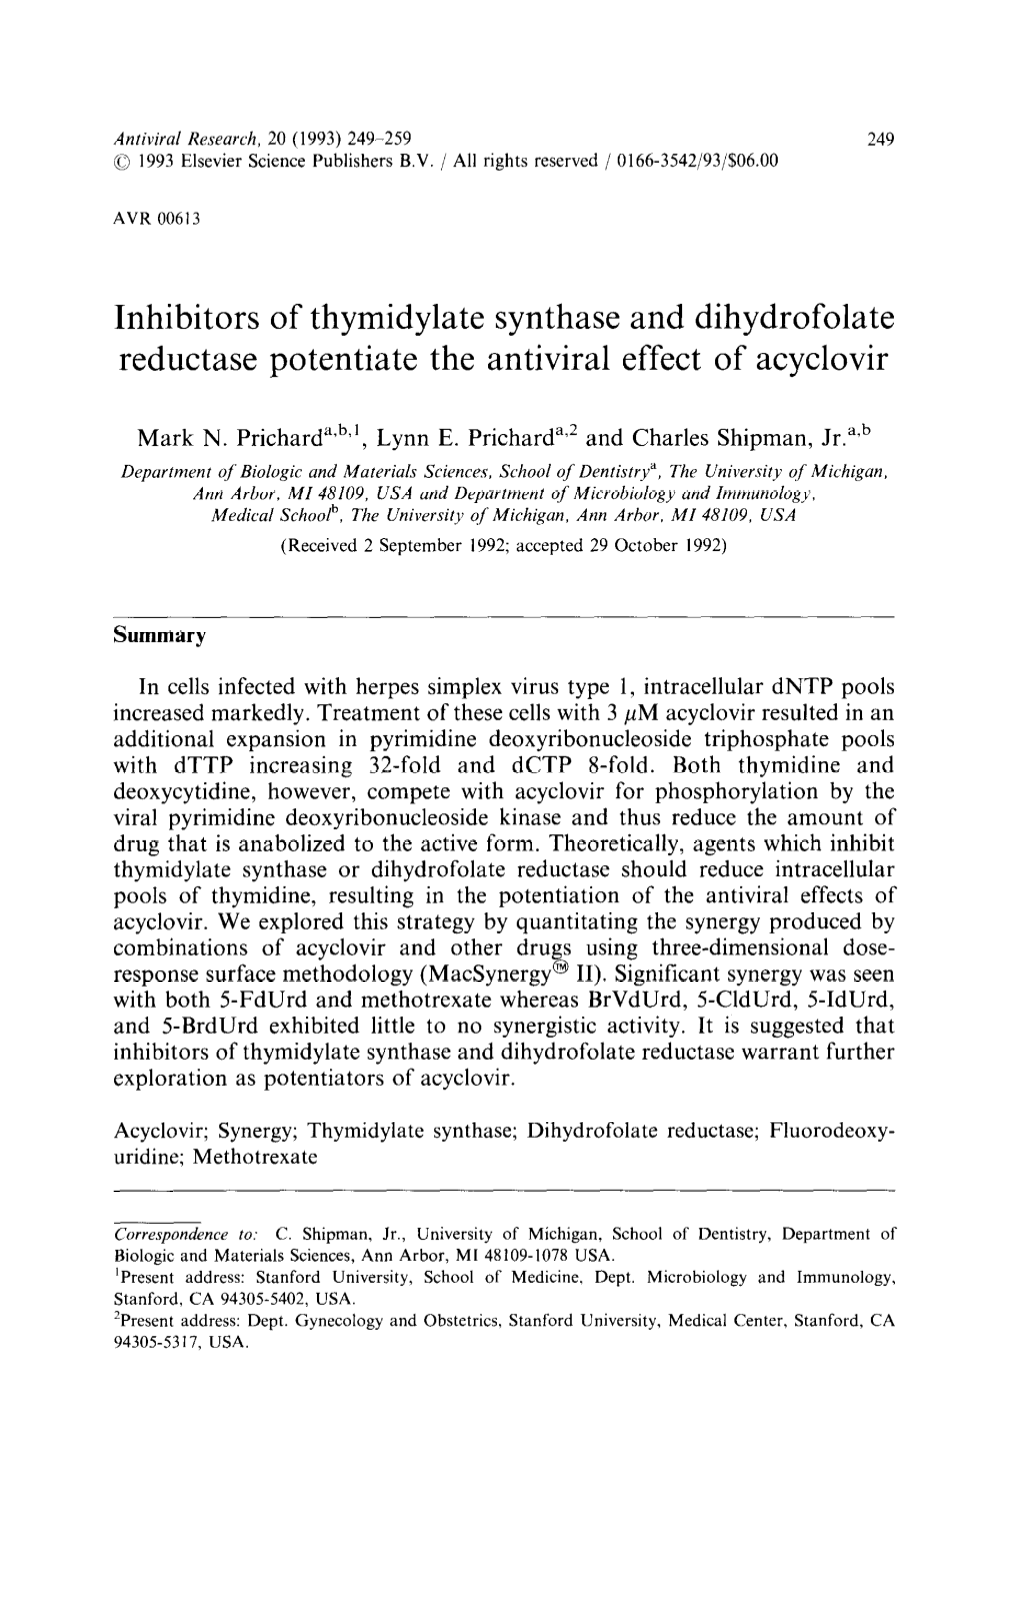 Inhibitors of Thymidylate Synthase and Dihydrofolate Reductase Potentiate the Antiviral Effect of Acyclovir